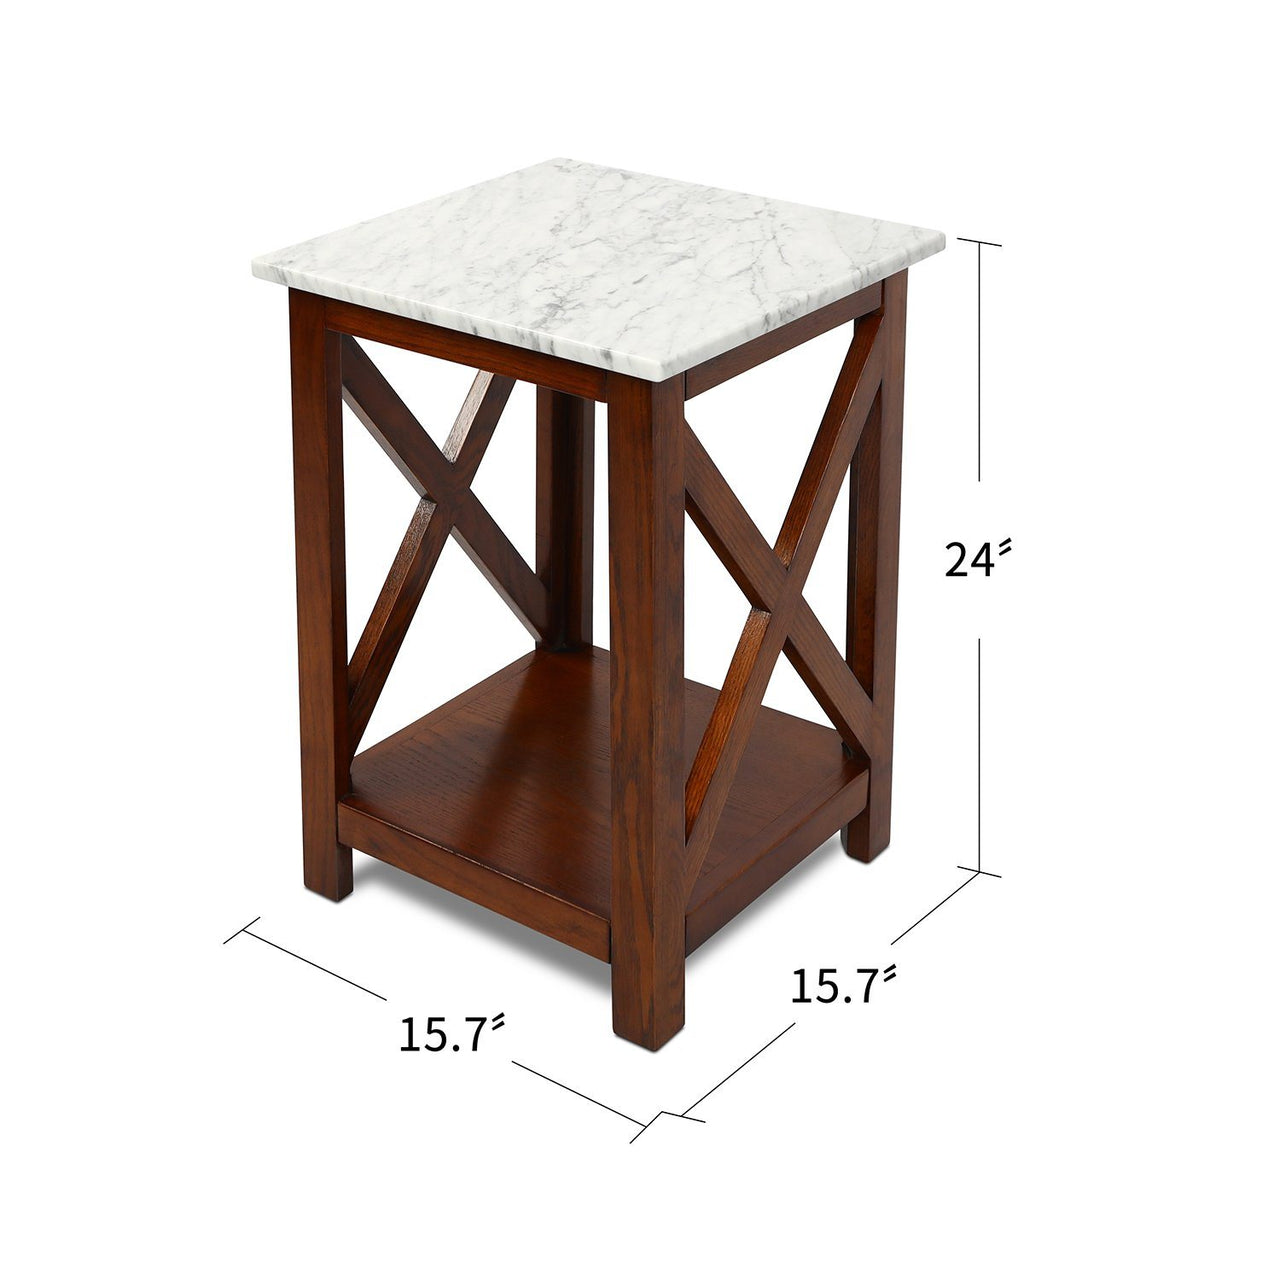 Agatha 15" Square Italian Carrara White Marble Side Table with Color Solid Wood Legs Writing Desk The Bianco Collection 